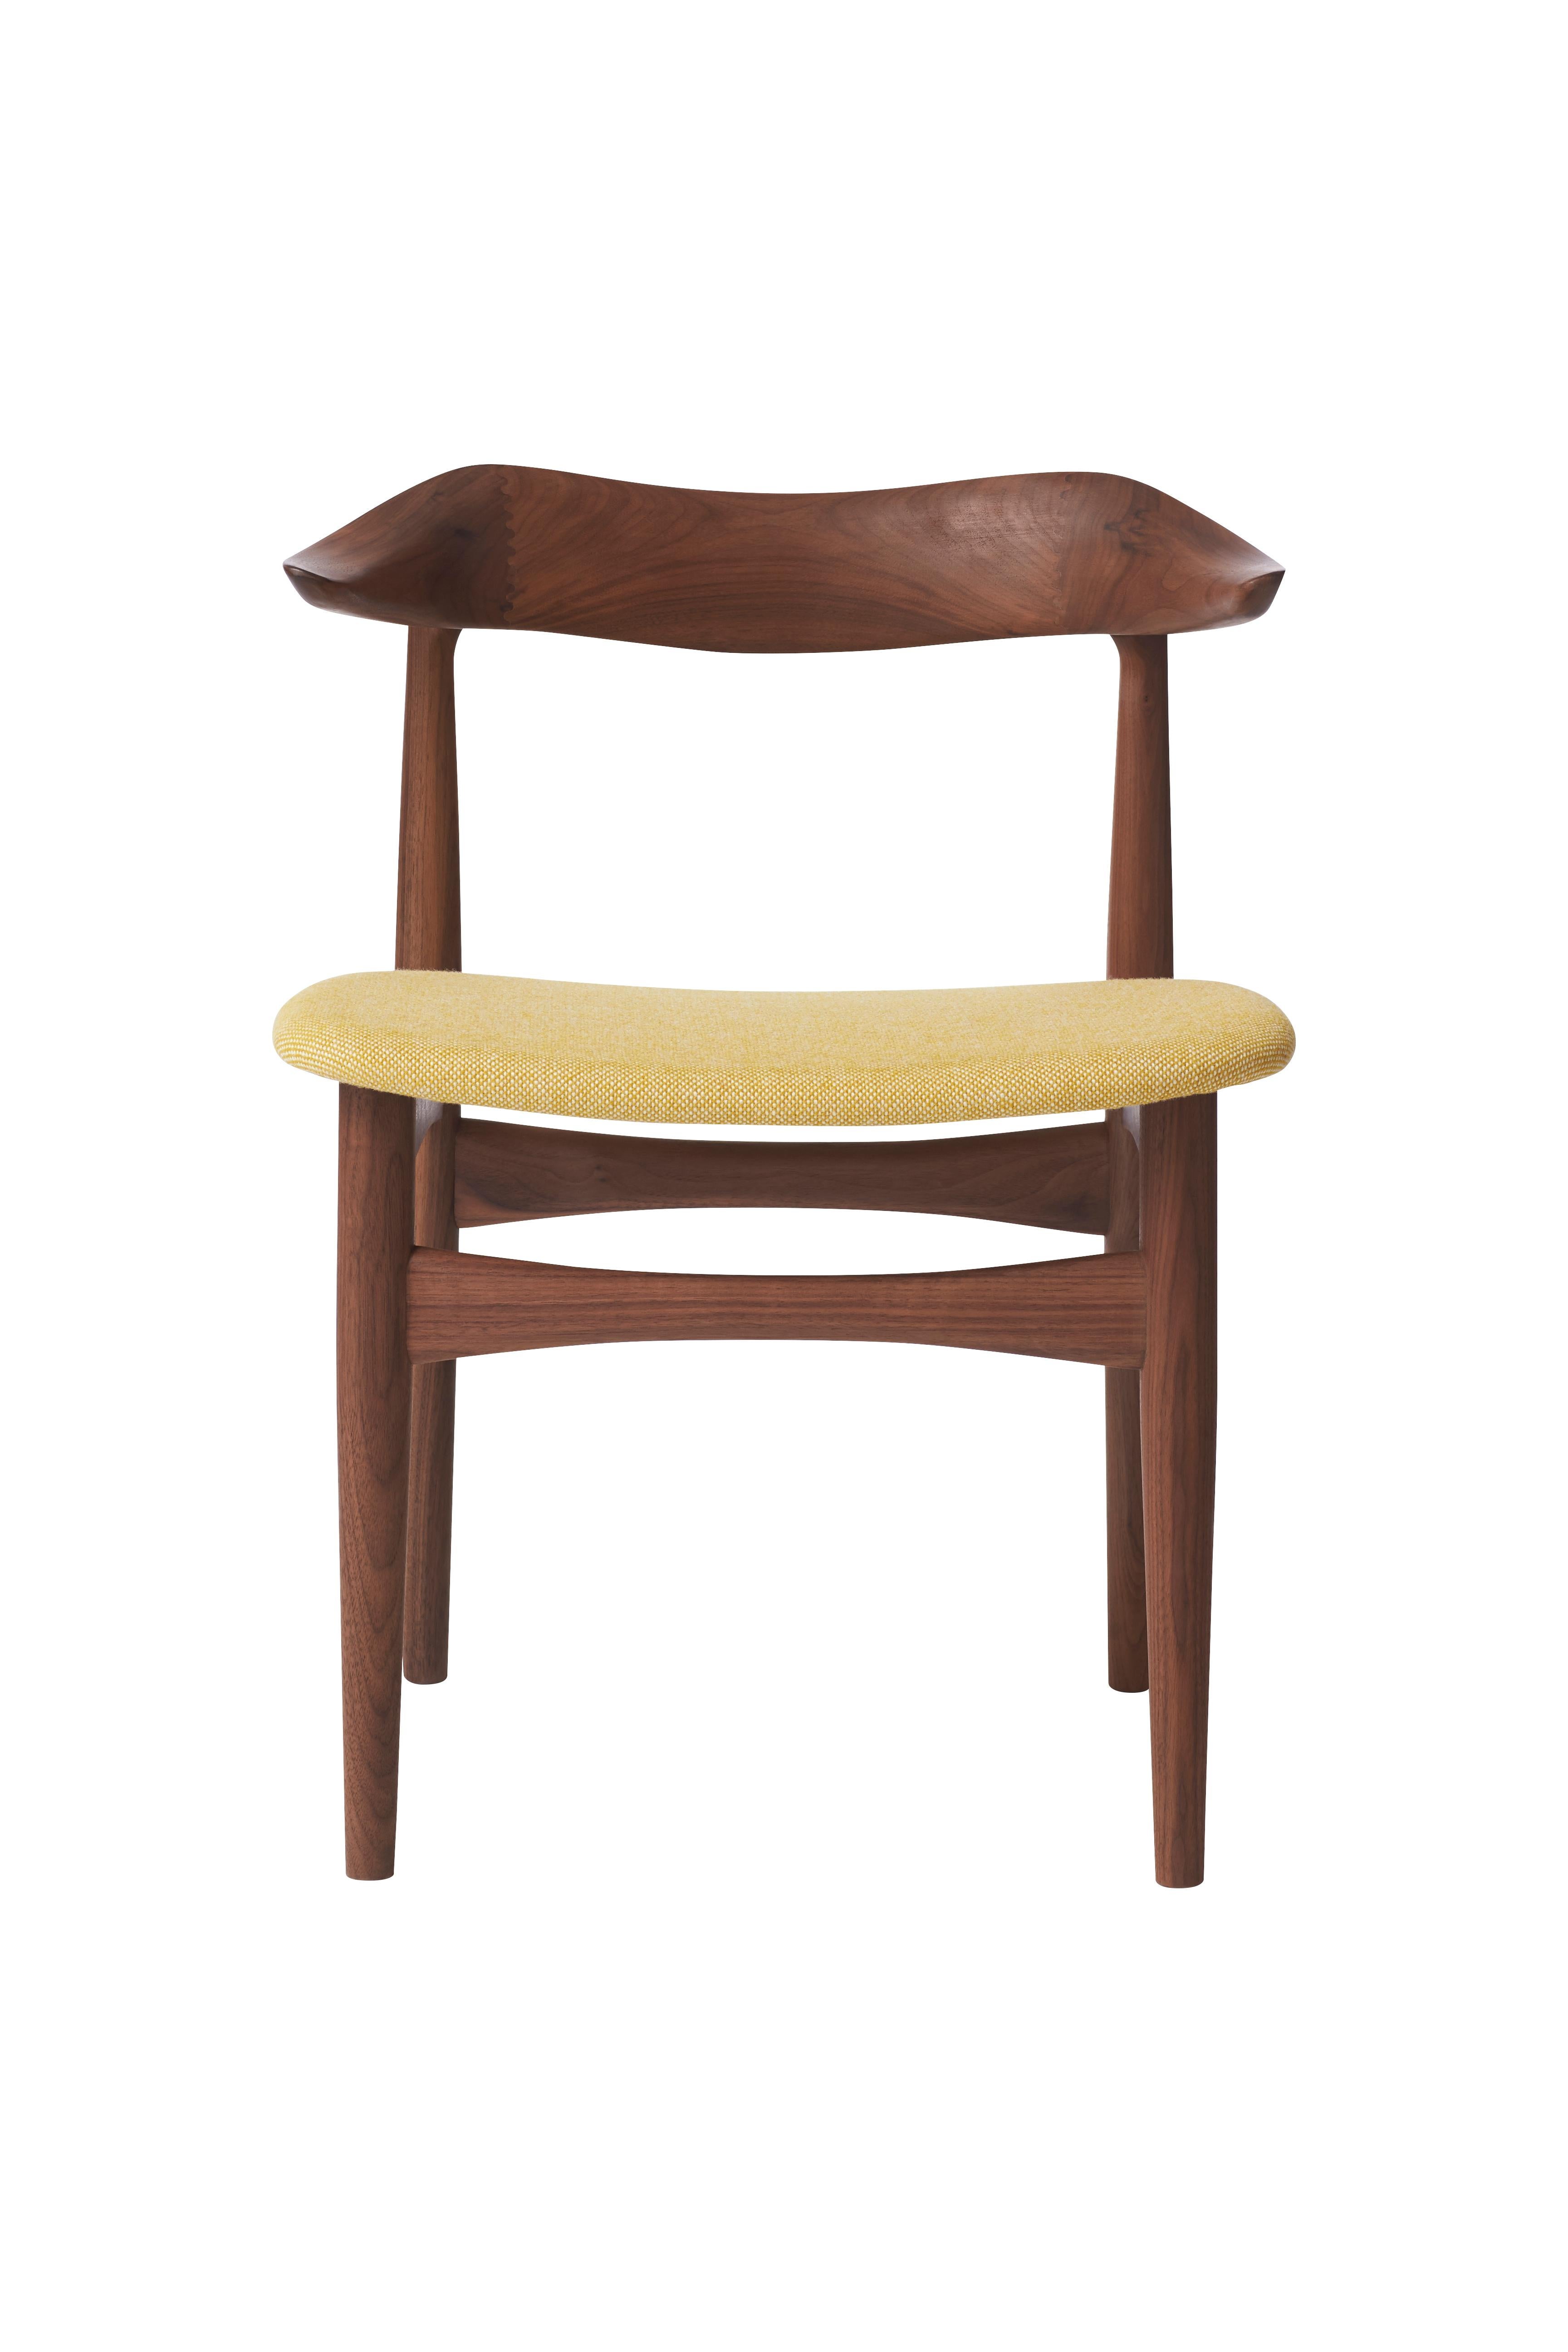 For Sale: Yellow (Halling 407) Cow Horn Walnut Chair, by Knud Færch from Warm Nordic